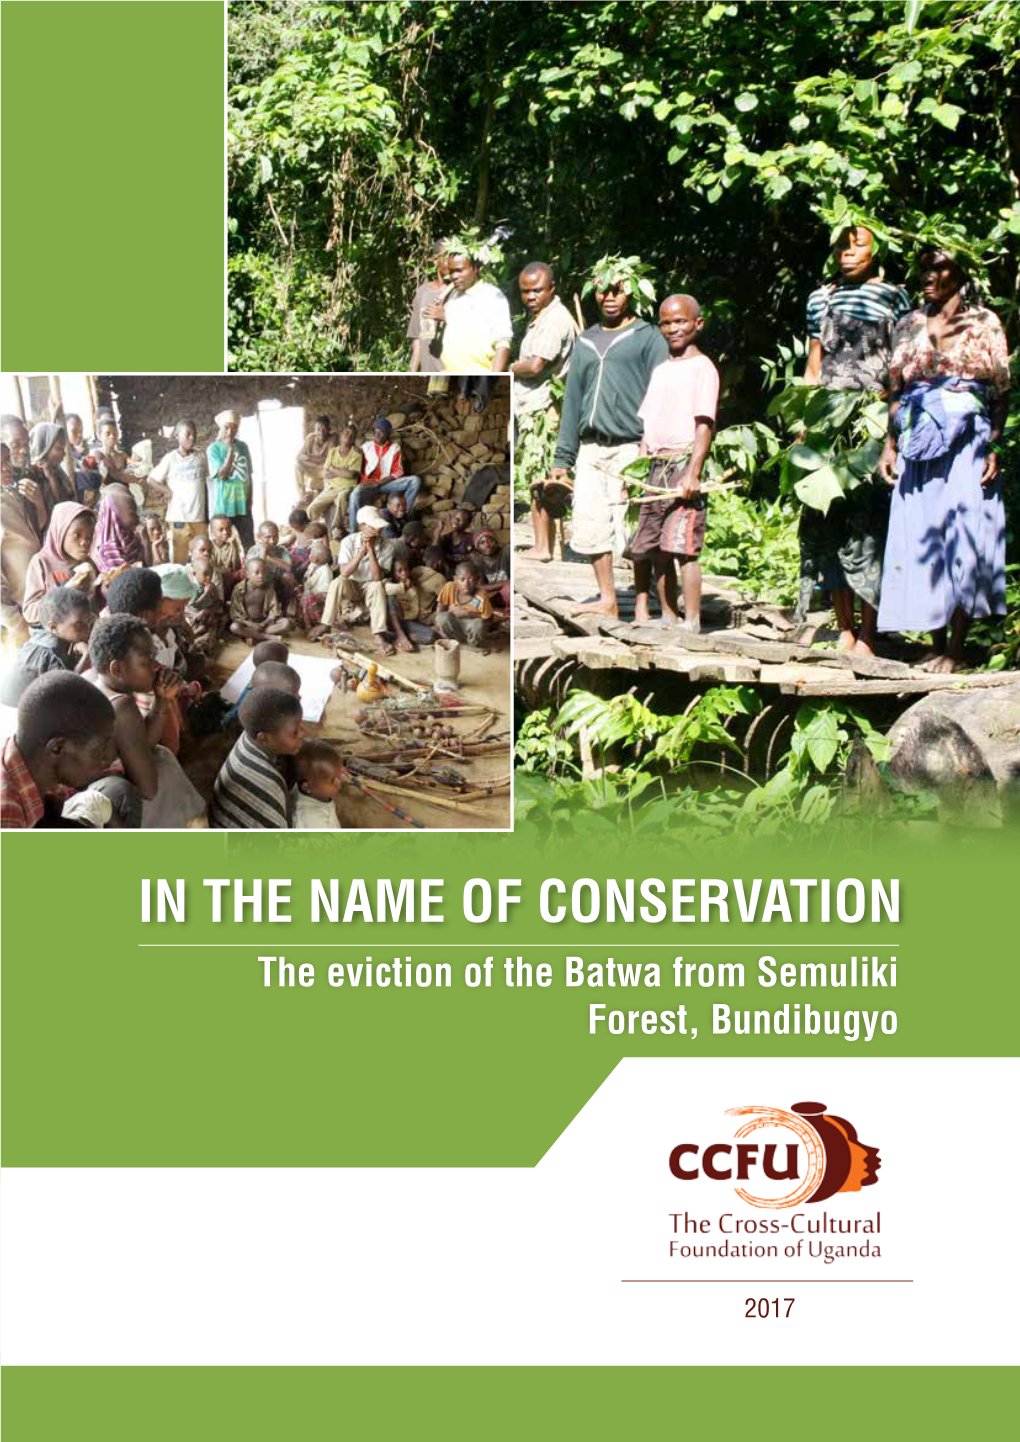 In the Name of Conservation: Eviction of the Batwa from Semuliki Forest